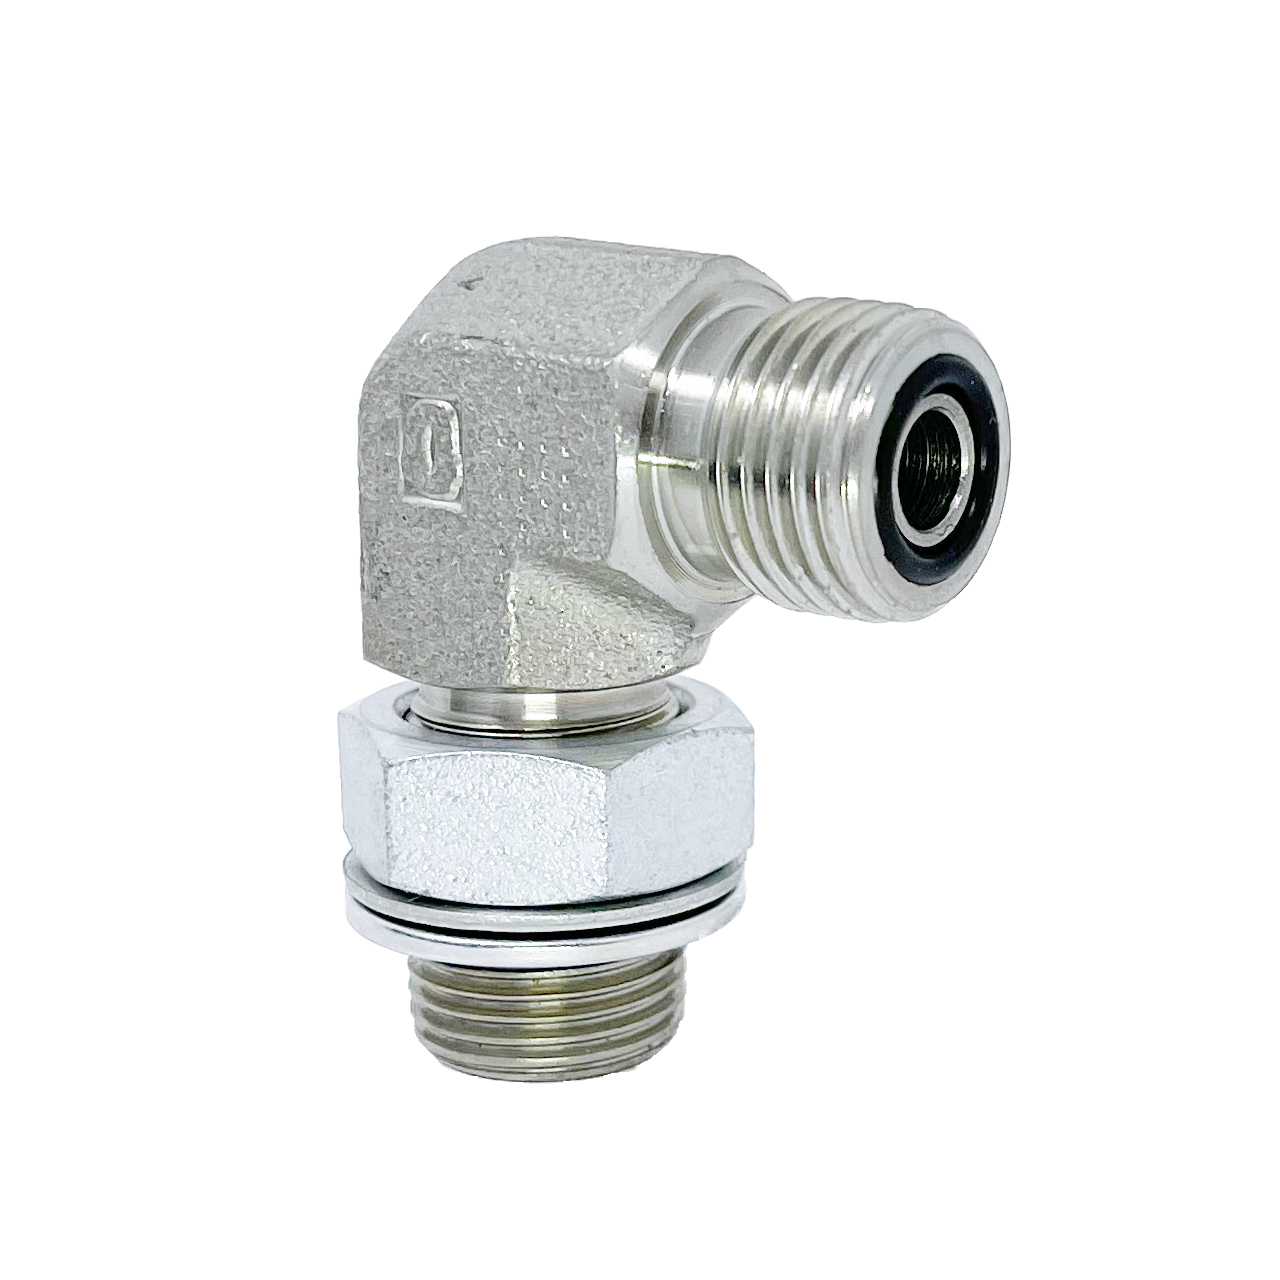 6059-06-04 : Adaptall 90-Degree  Adapter, Male 0.375 (3/8") ORFS x Male 0.25 (1/4") BSPP, Carbon Steel